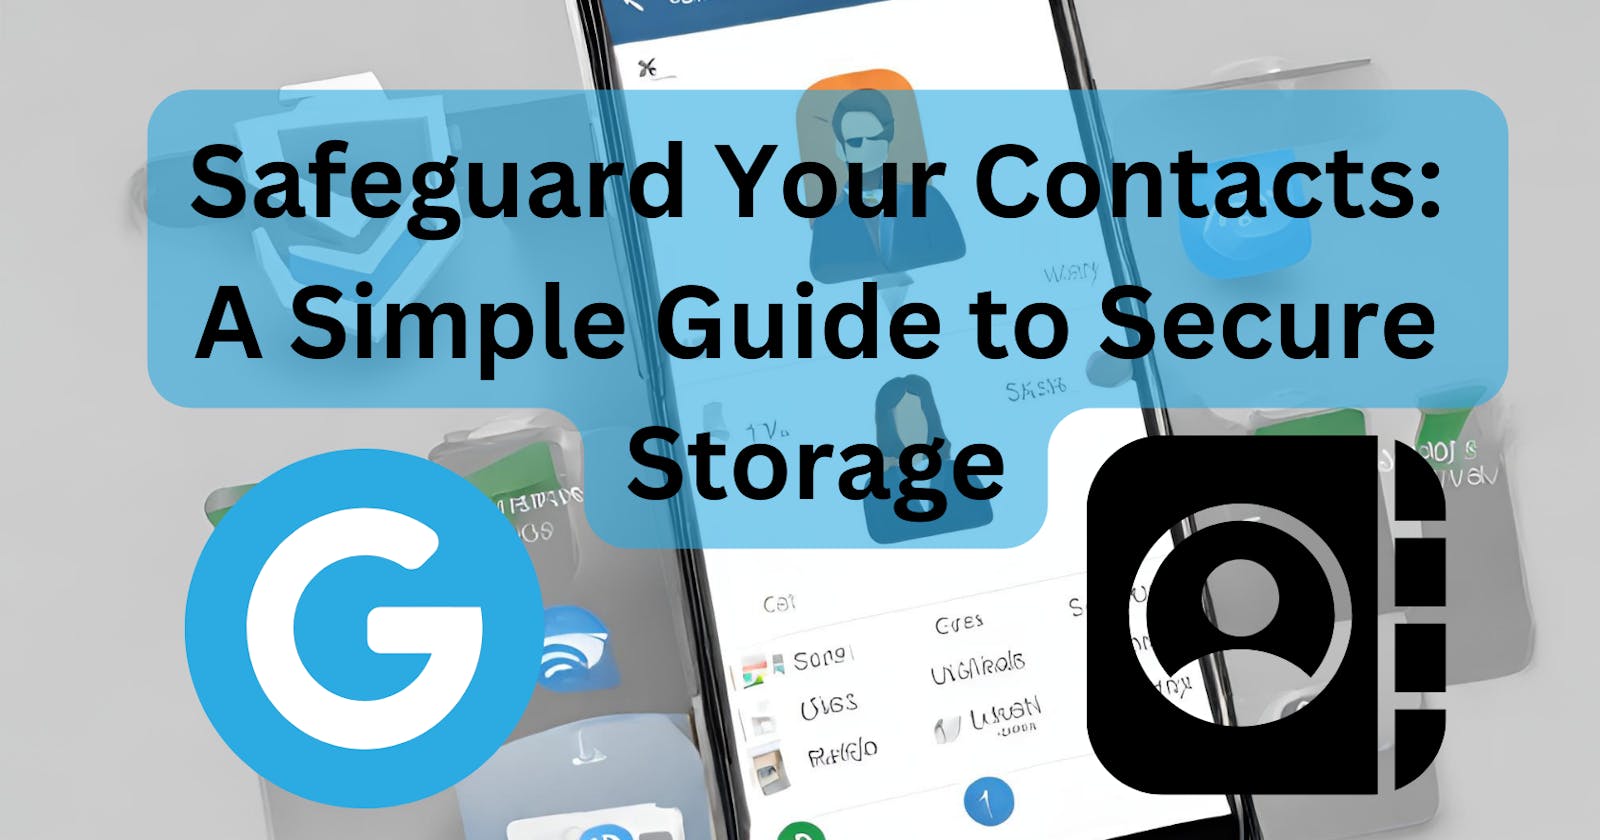 Safeguard Your Contacts: A Simple Guide to Secure Storage